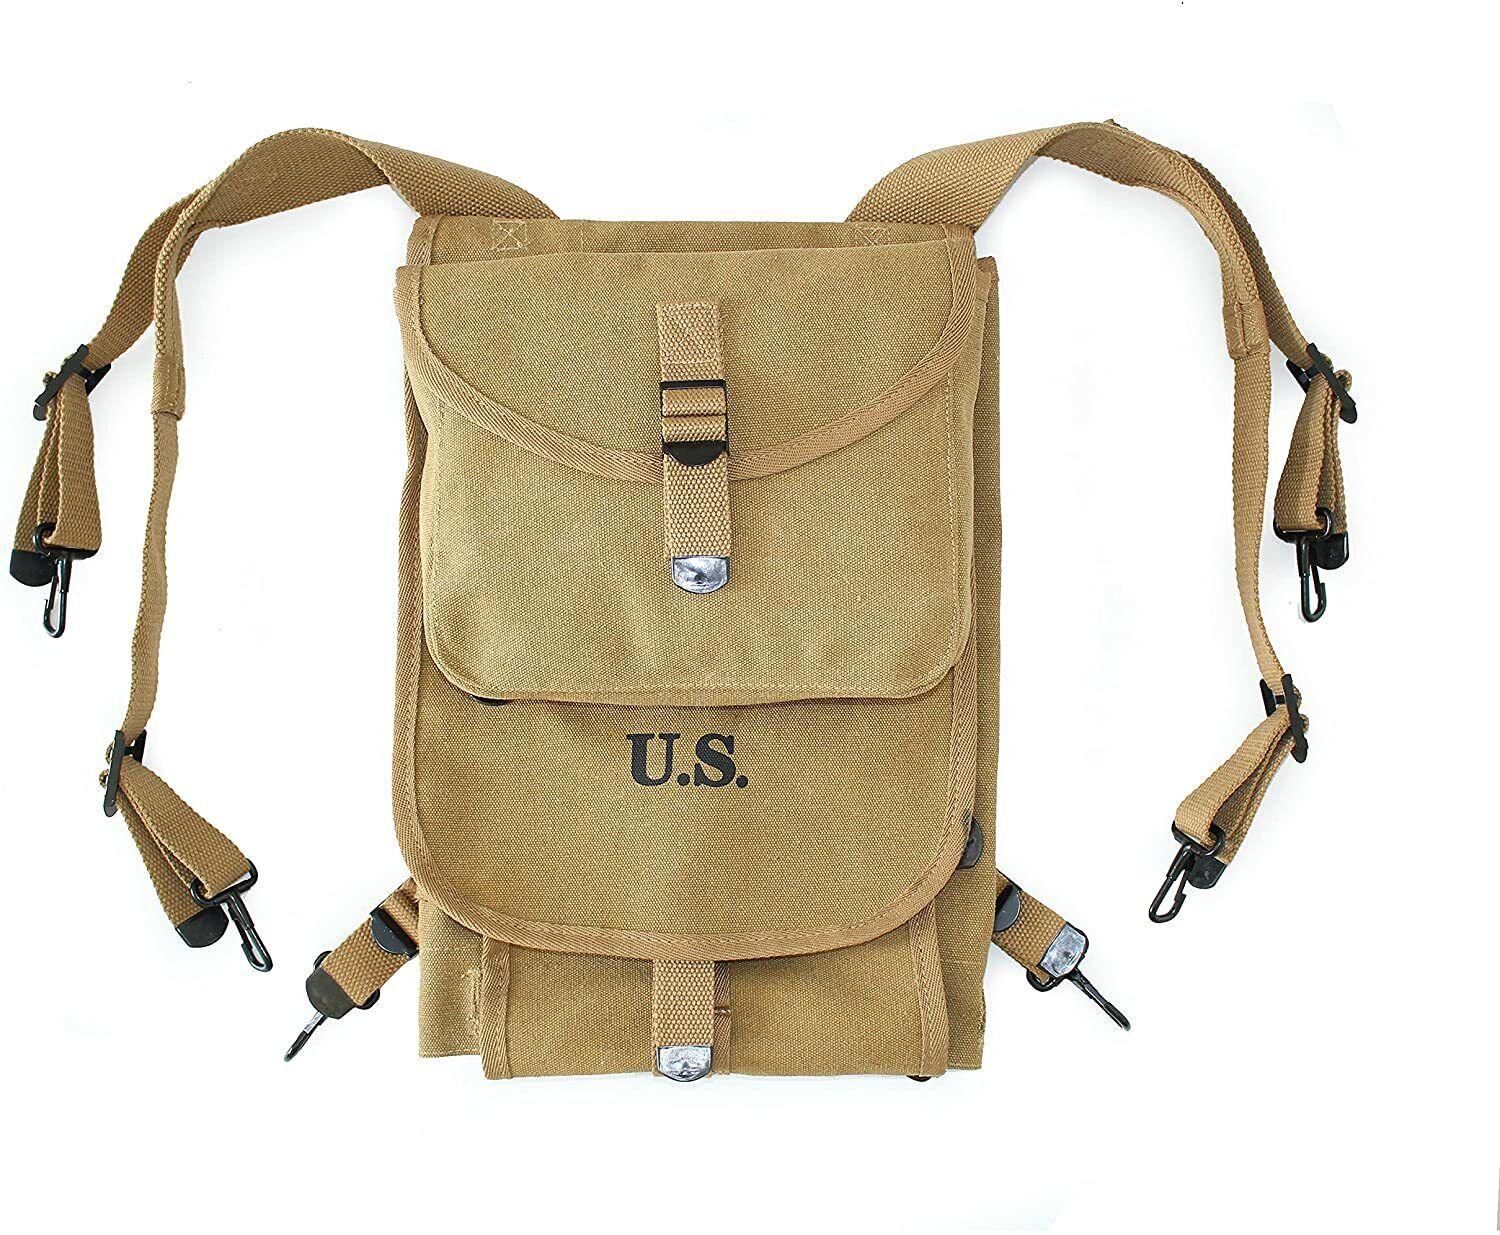 WW2 US M1928 Haversack Military Backpack WWII Reproduction Canvas Khaki